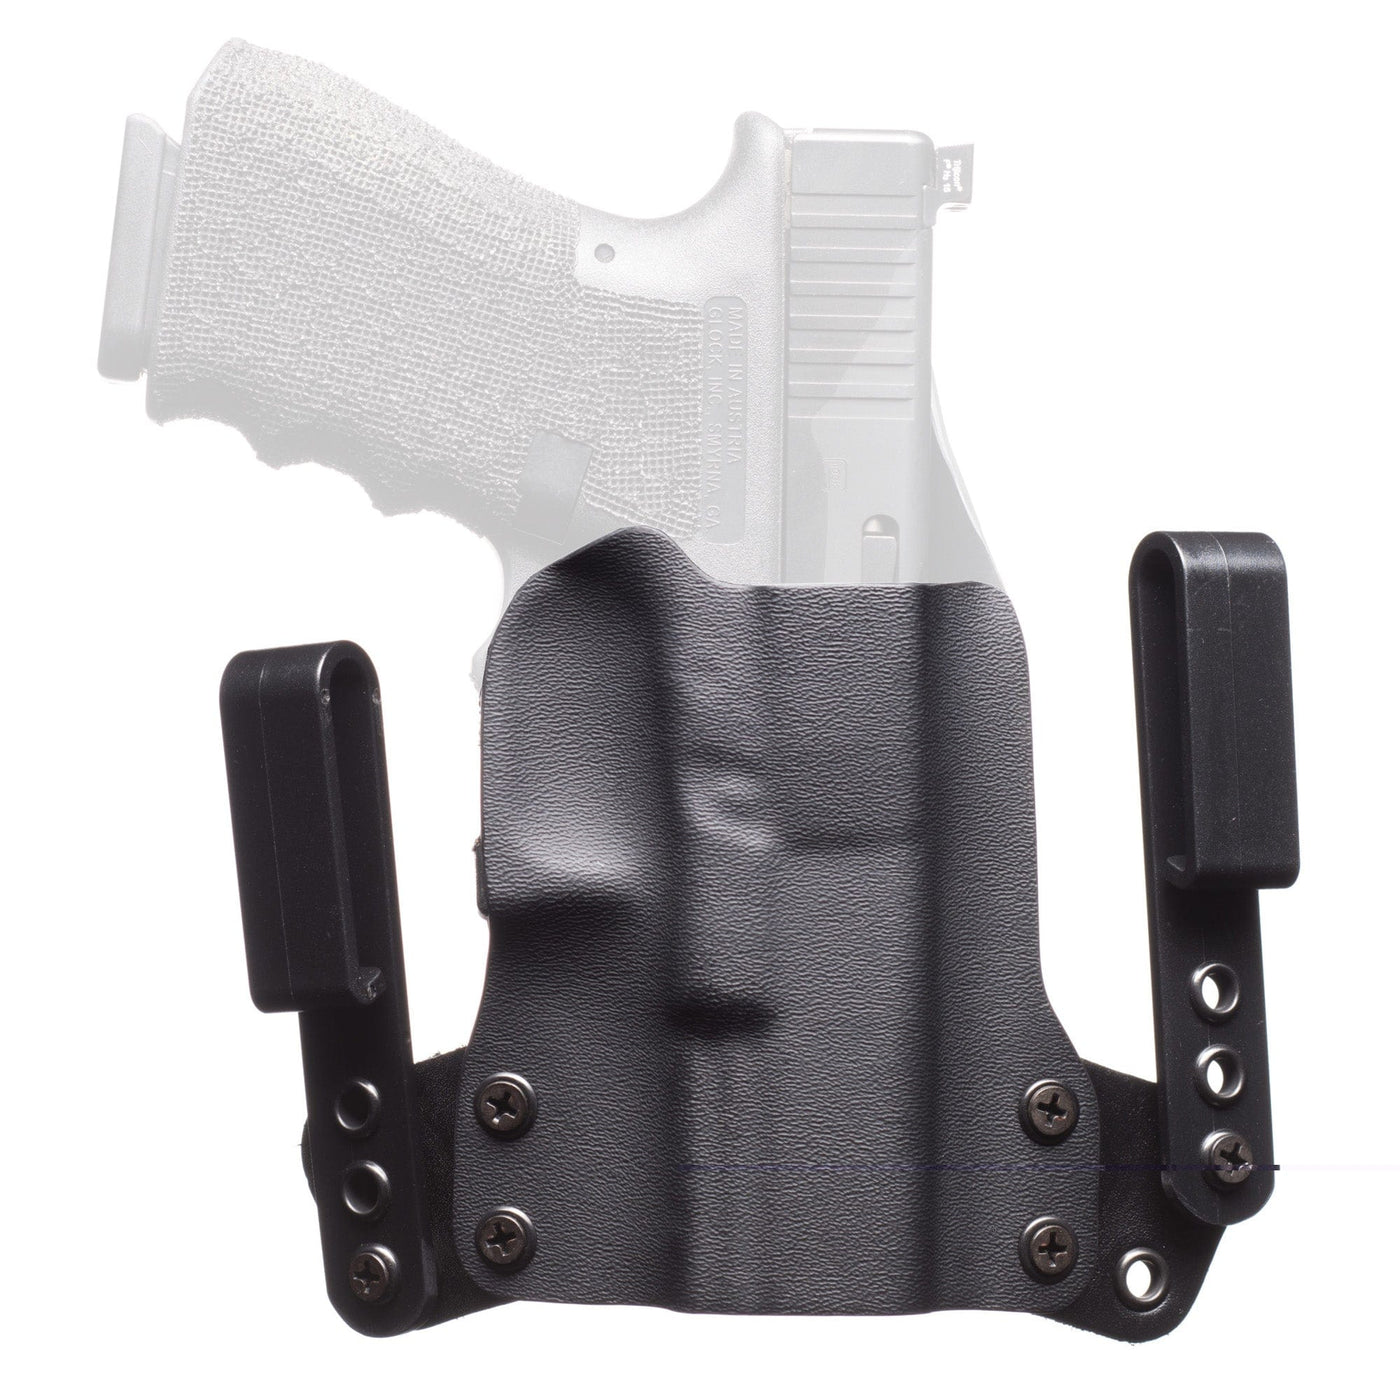 BlackPoint Tactical Blk Pnt Mini Wing S&w Gov Rh Blk Holsters